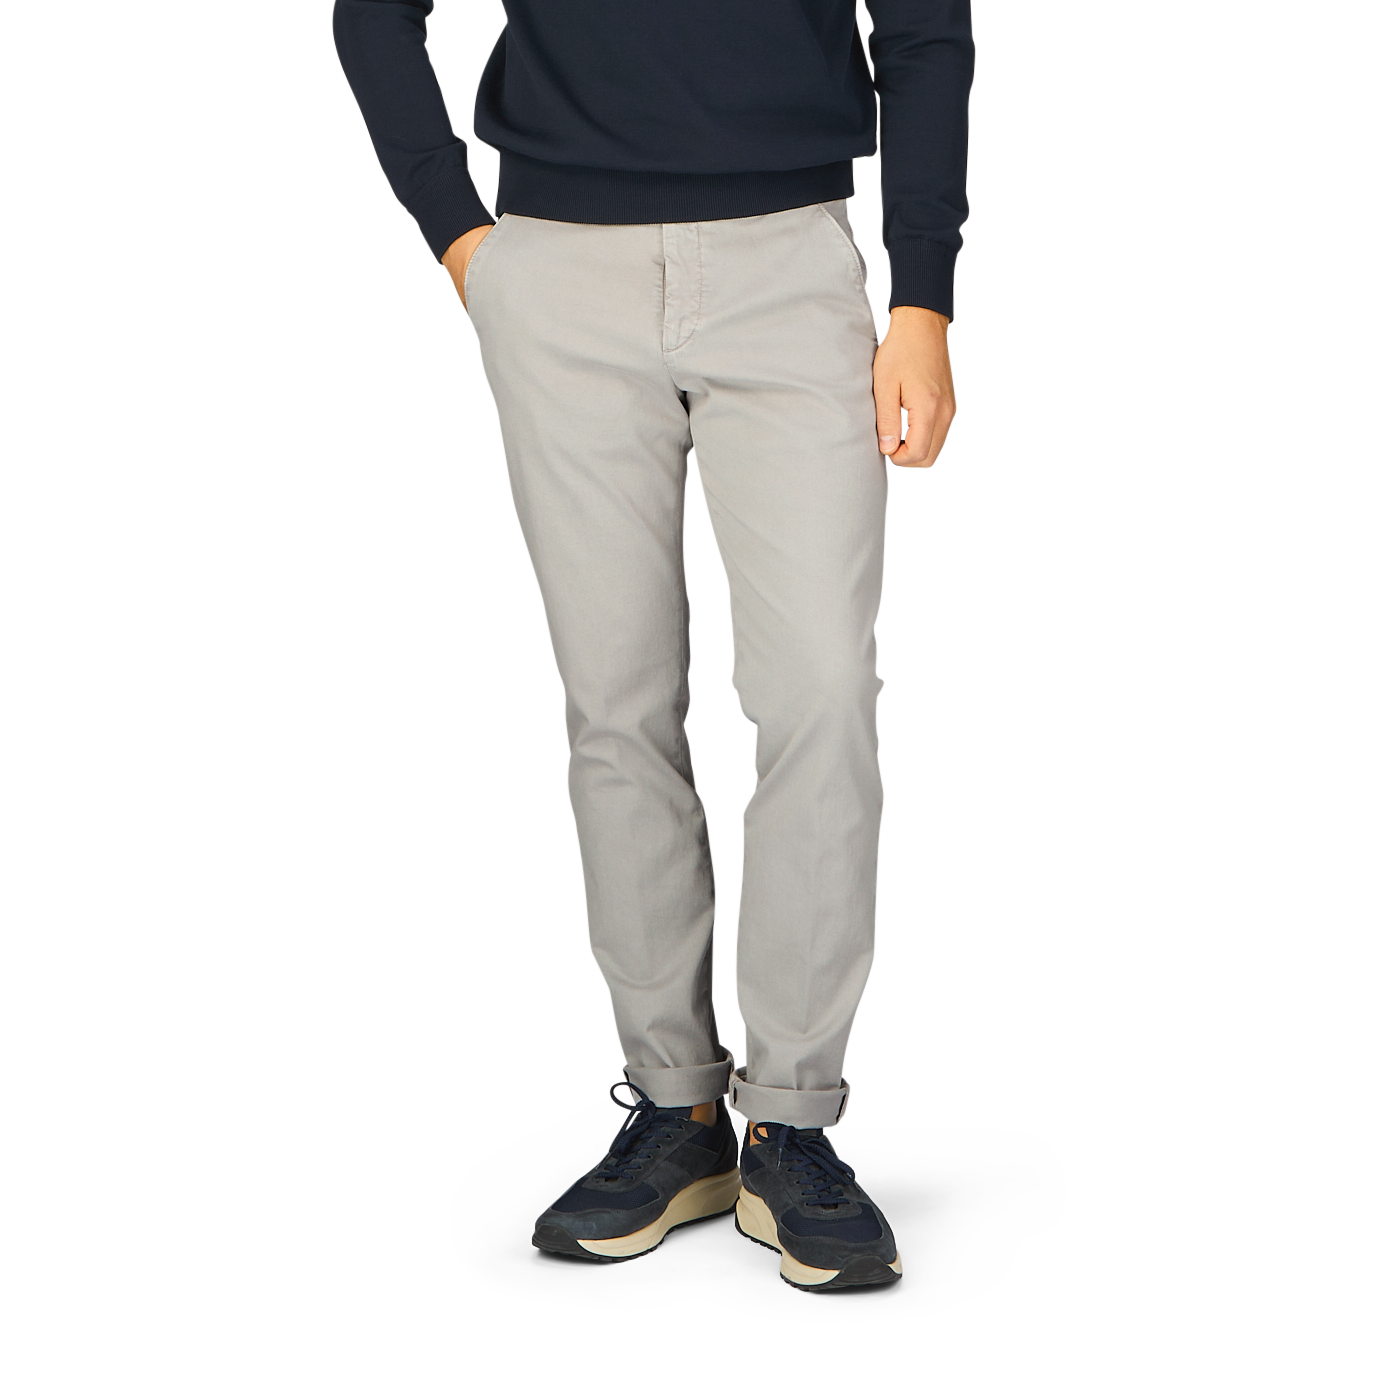 A man wearing Light Grey Cotton Stretch BG62 Casual Chinos from Briglia and a black sweater.